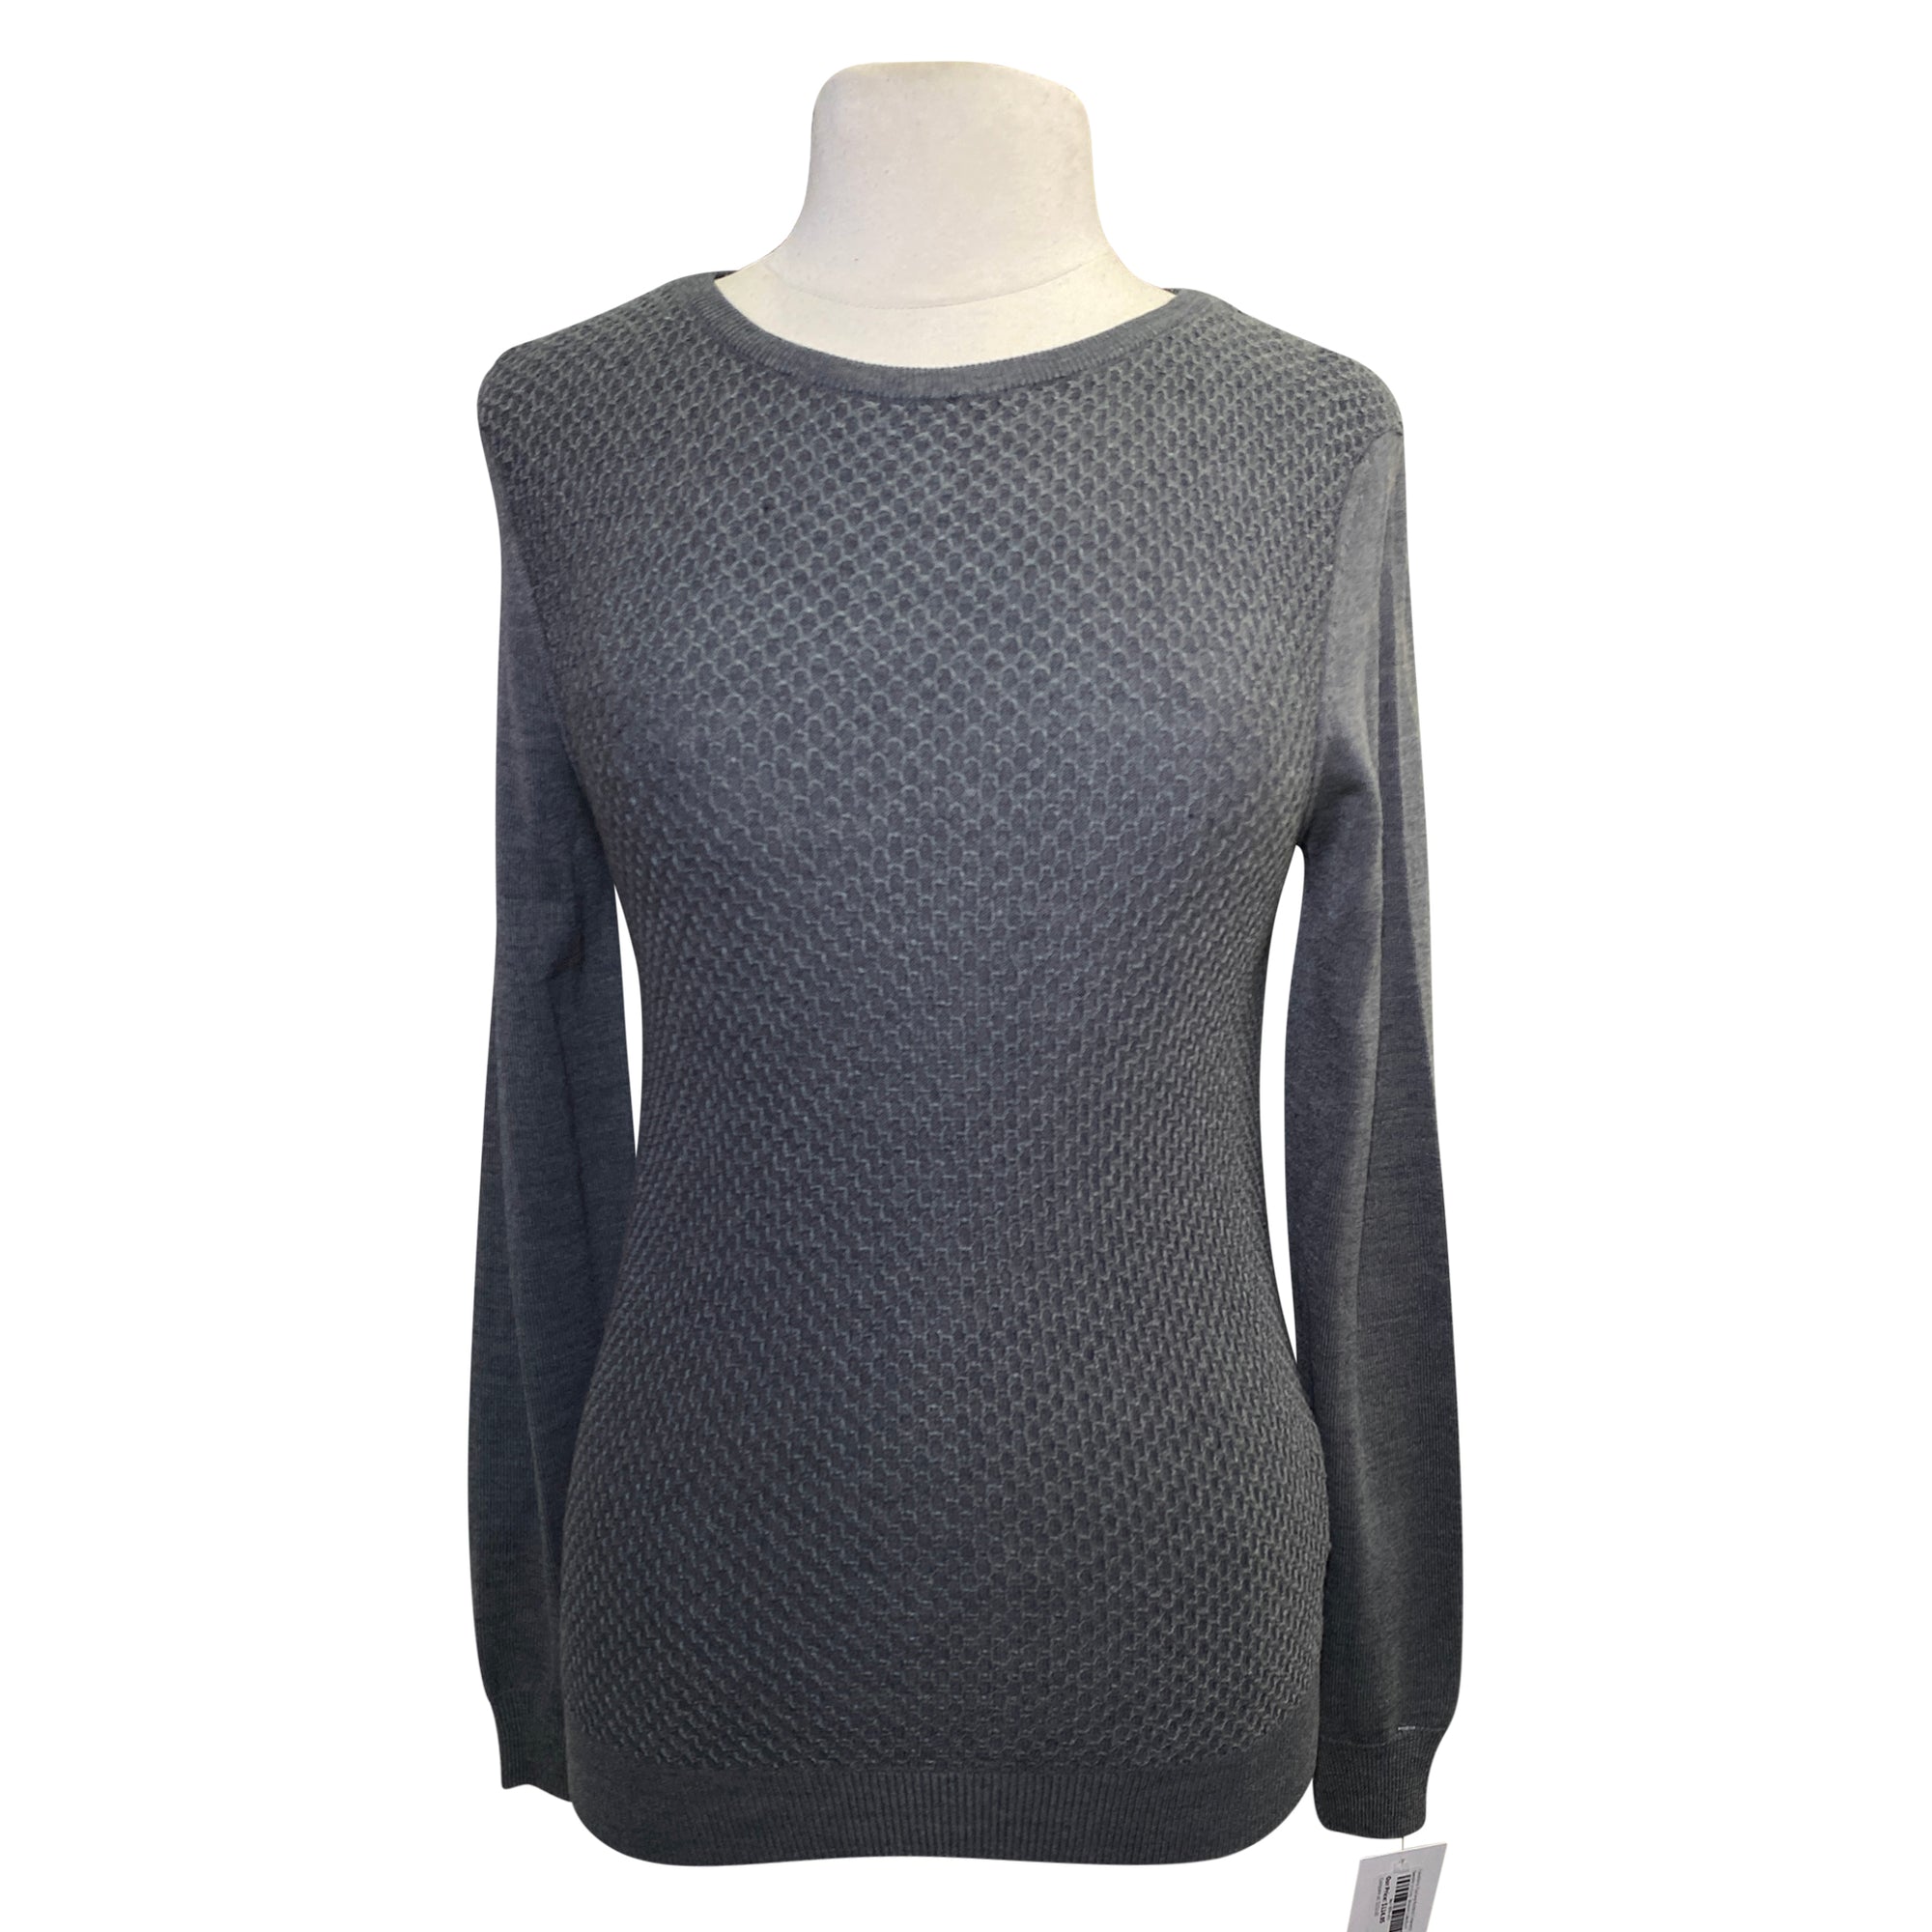 Cavalleria Toscana Knitted Crewneck Sweater in Grey